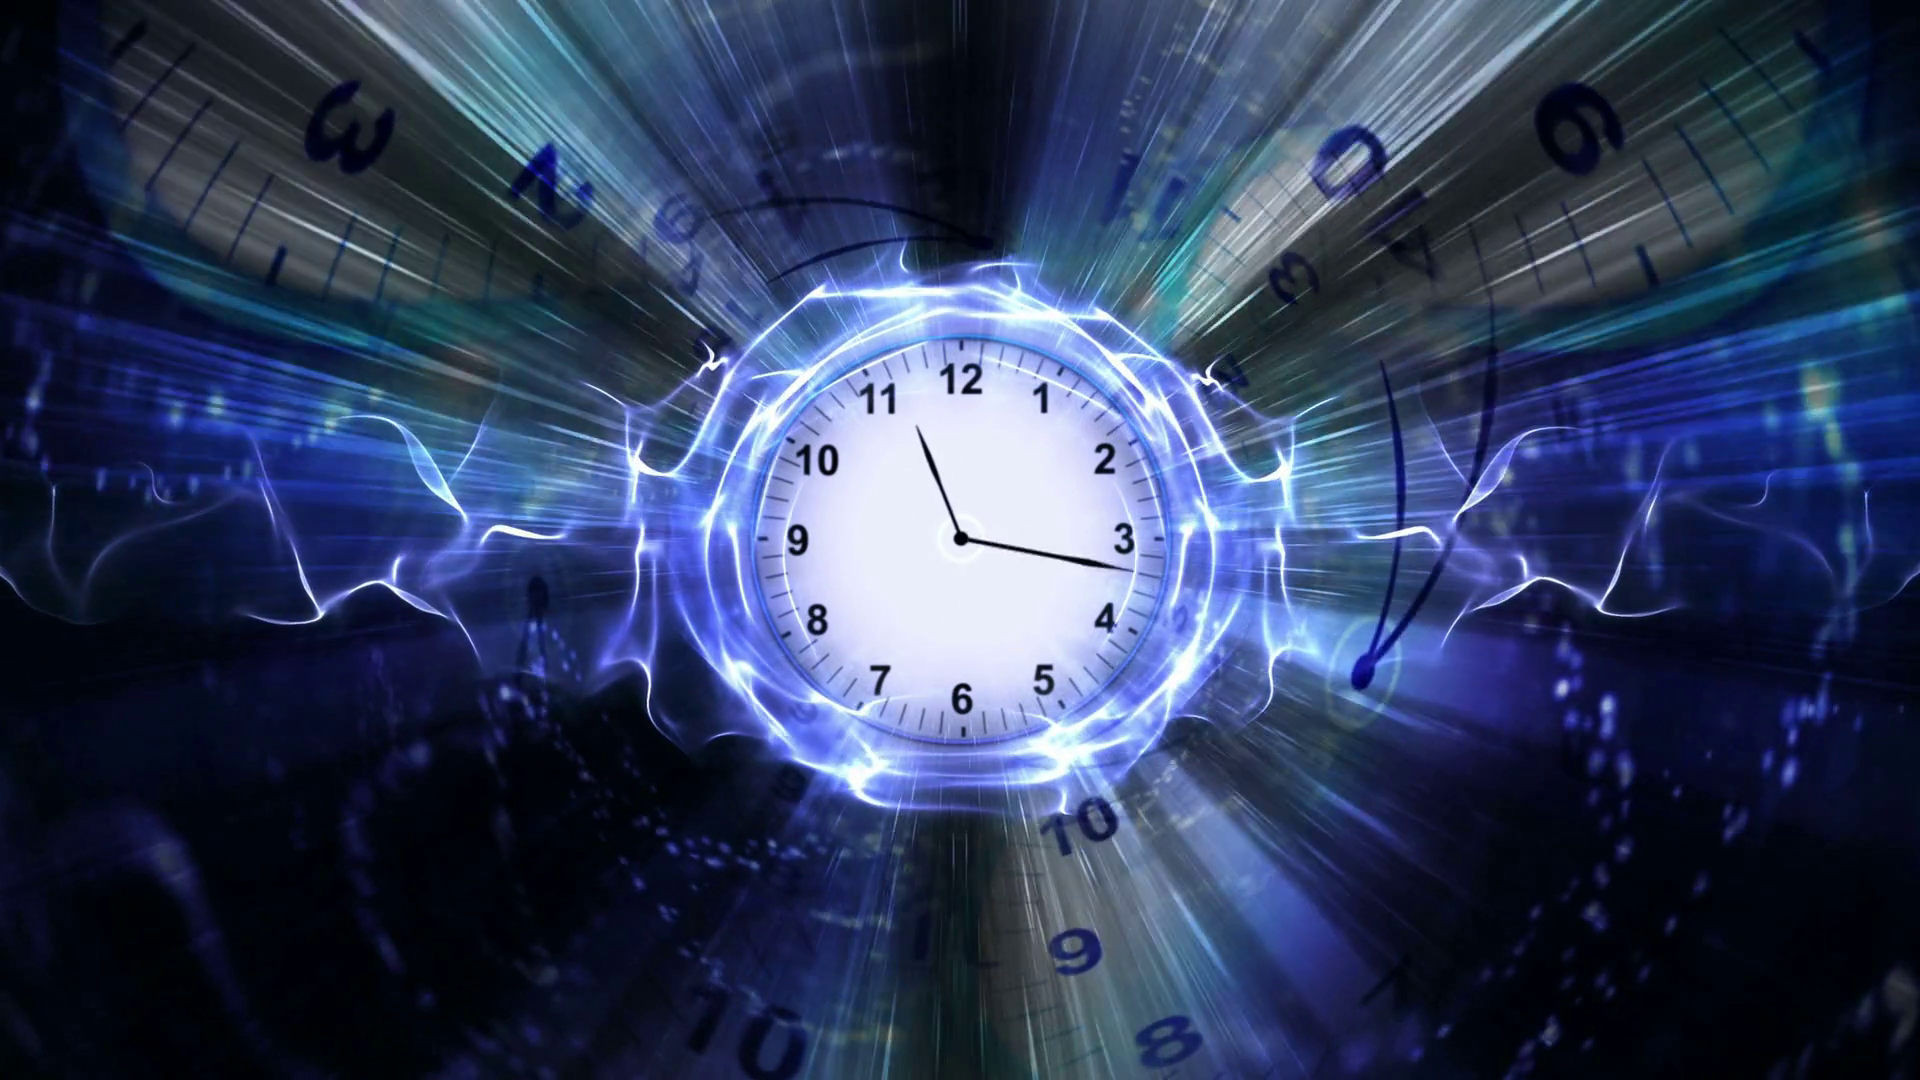 Time Travel Background - Clock Travelling To Time - 1920x1080 Wallpaper -  